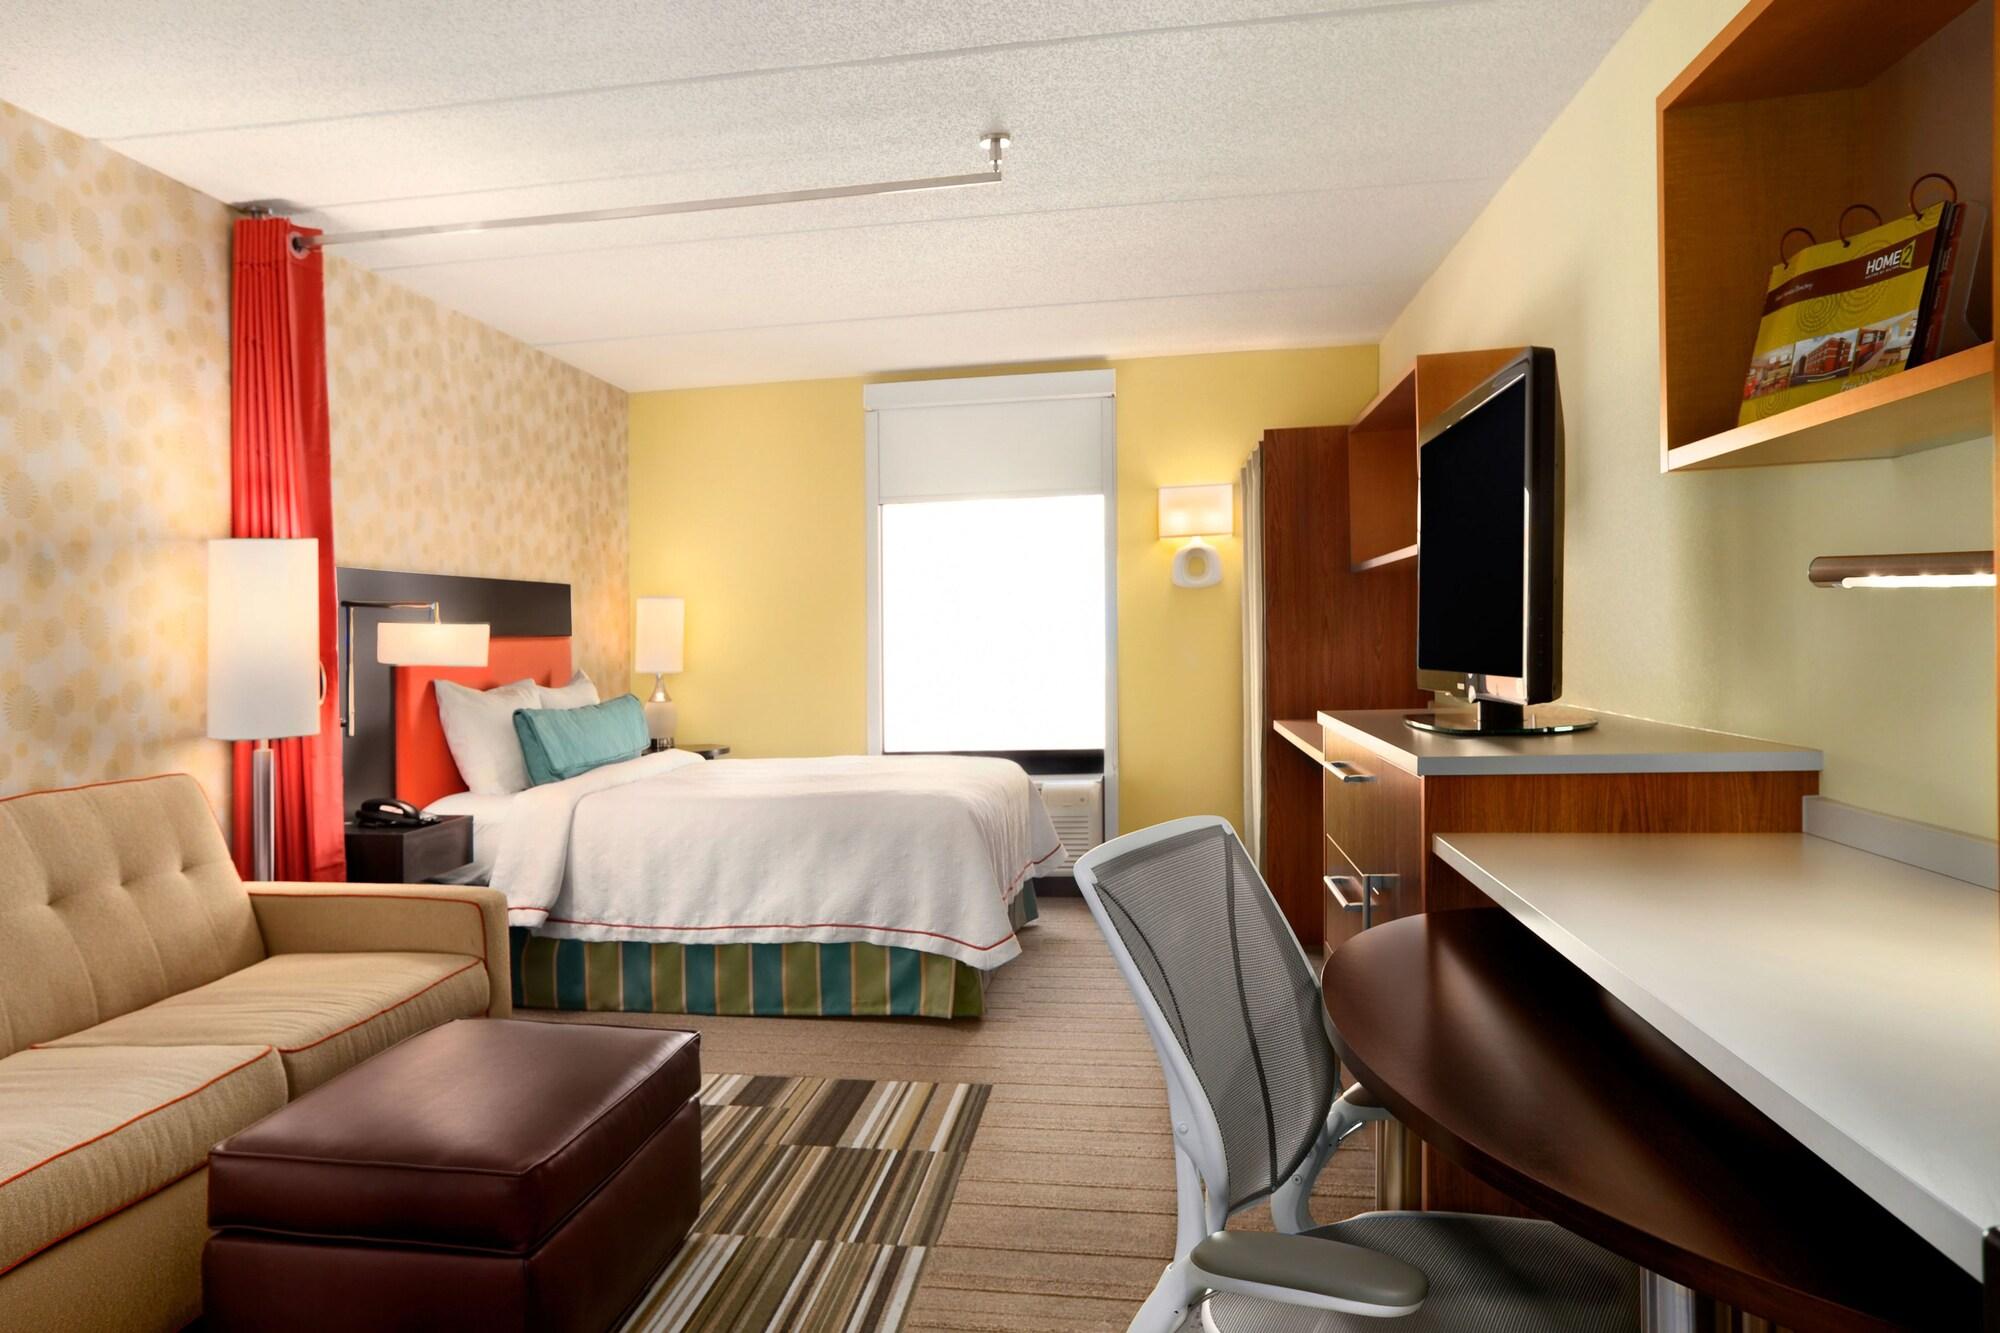 Home2Suites Pittsburgh Cranberry Cranberry Township Εξωτερικό φωτογραφία